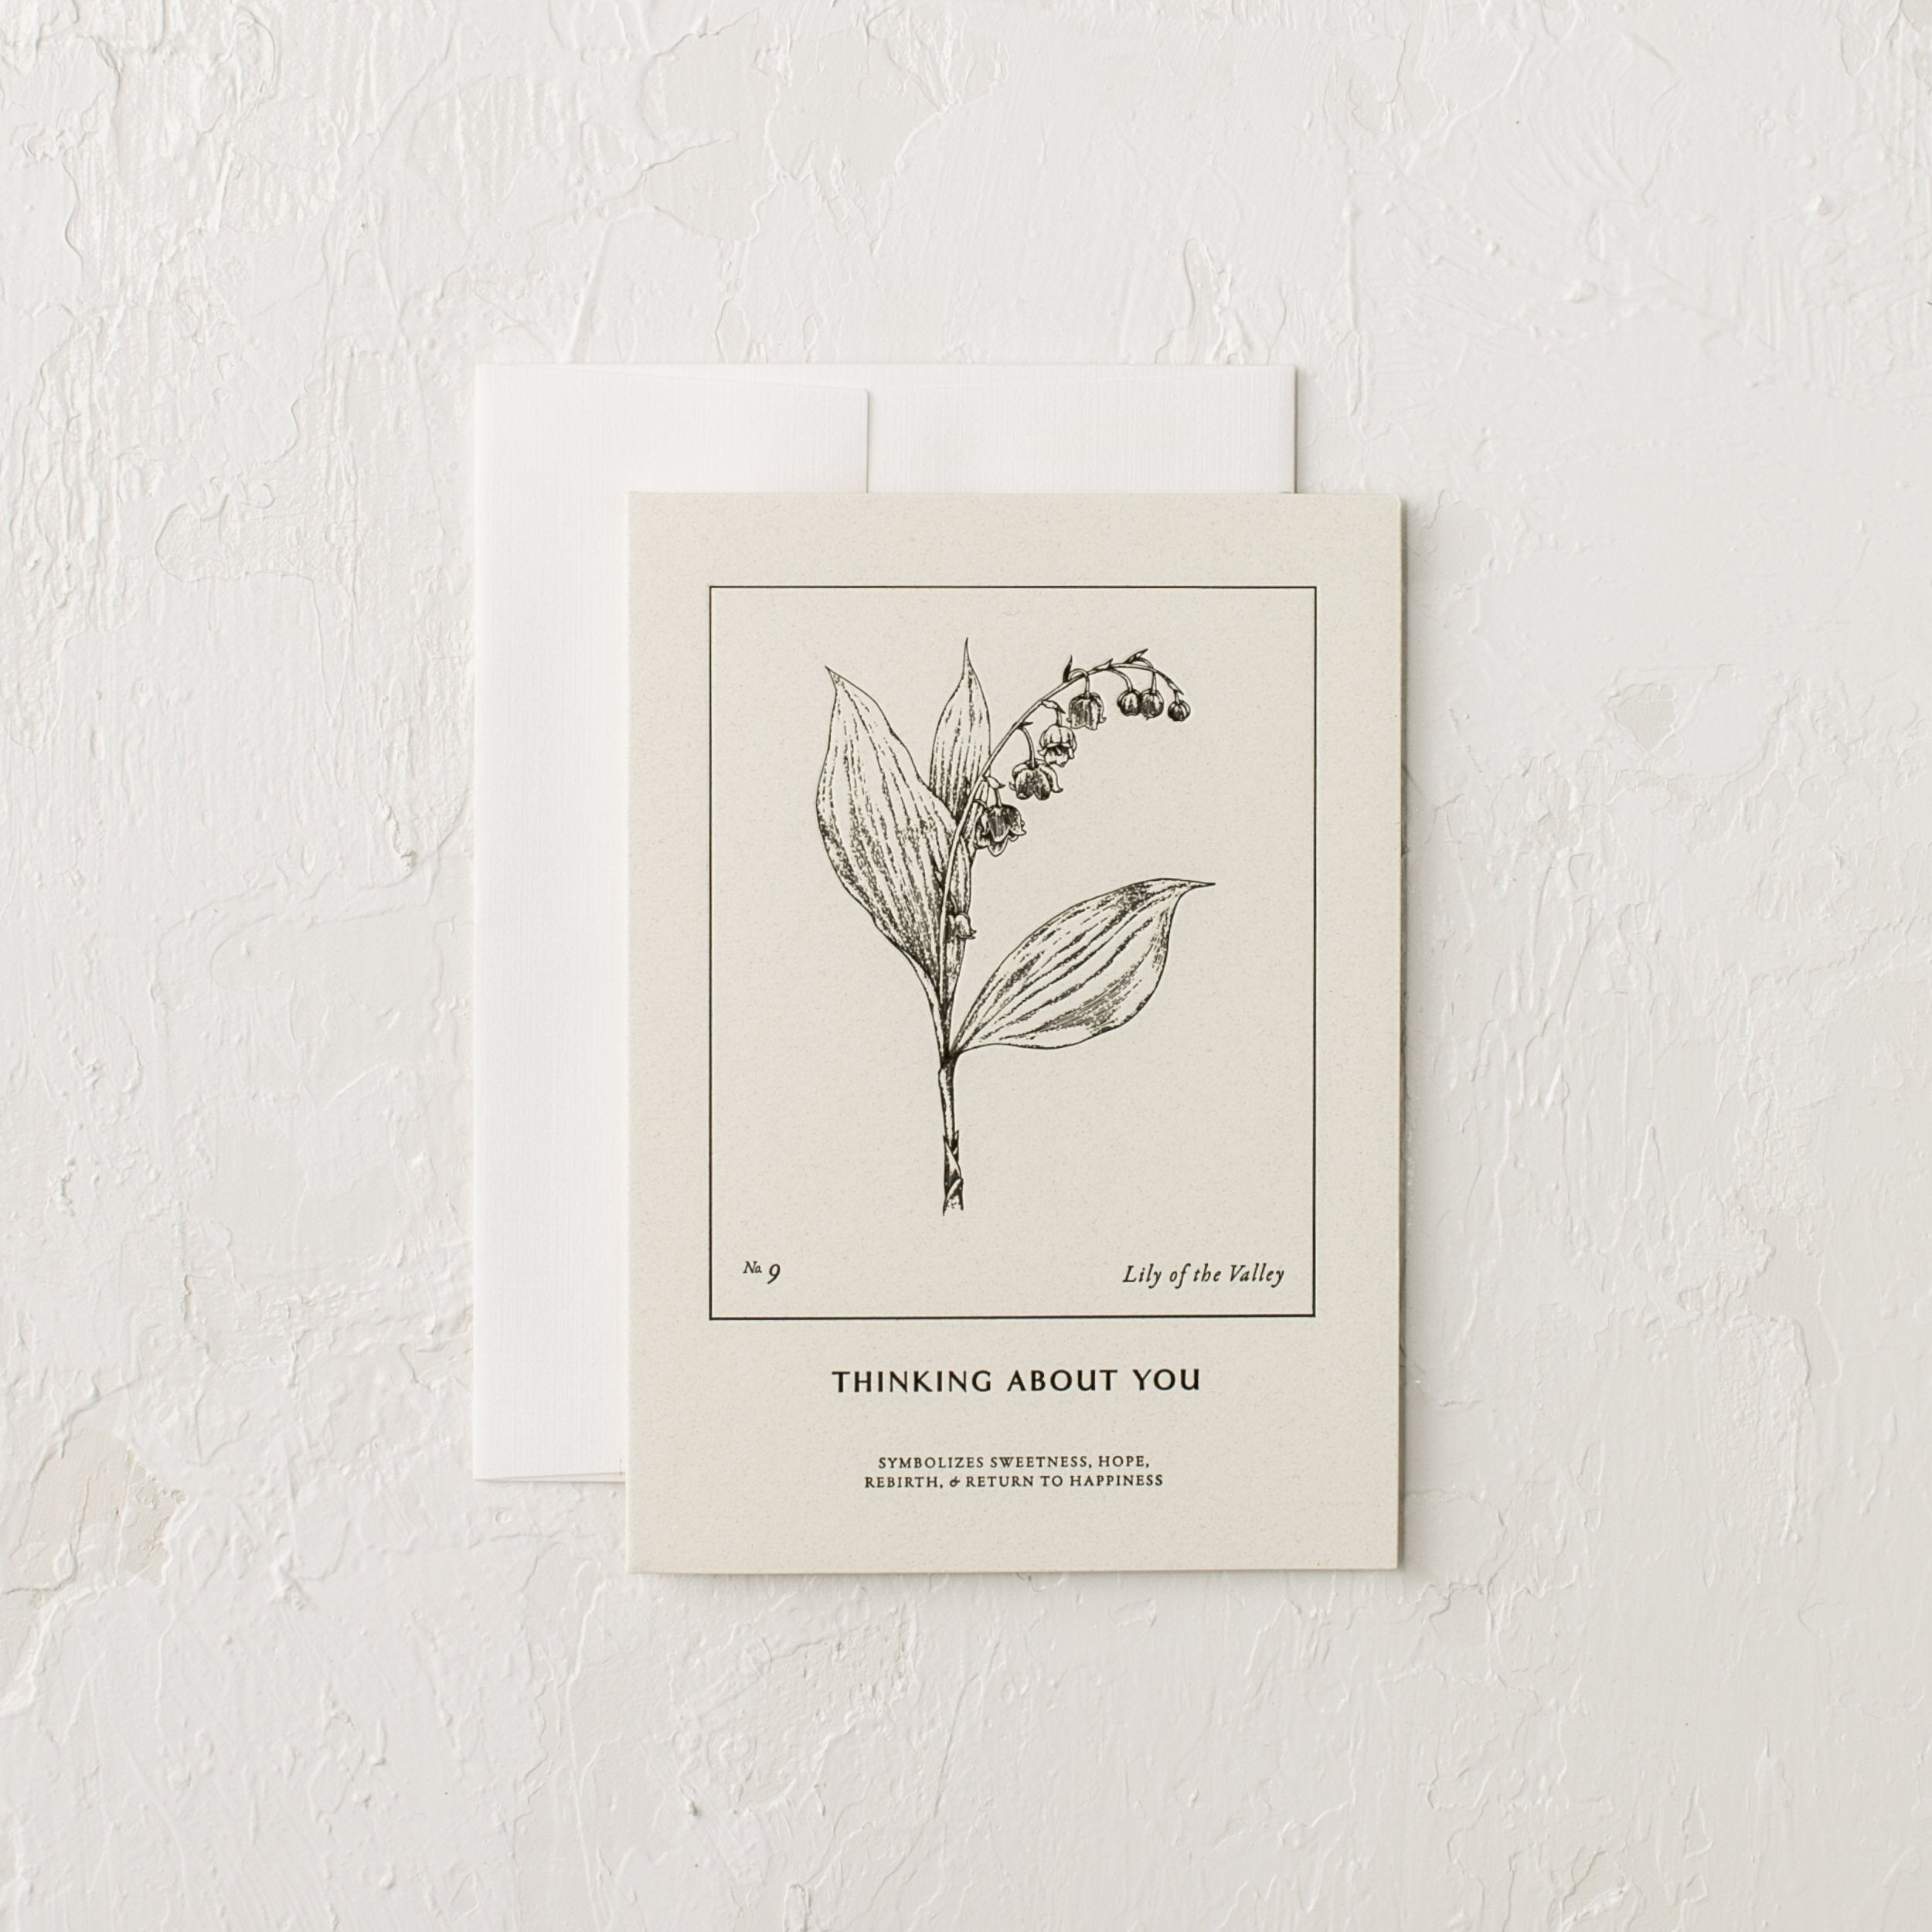 Letter pressed greeting card with a botanical illustrated Lily of the Valley, "Thinking About You" - Symbolizes sweetness, hope, rebirth and return to happiness." Designed and sold by Verdant, Kansas City.  